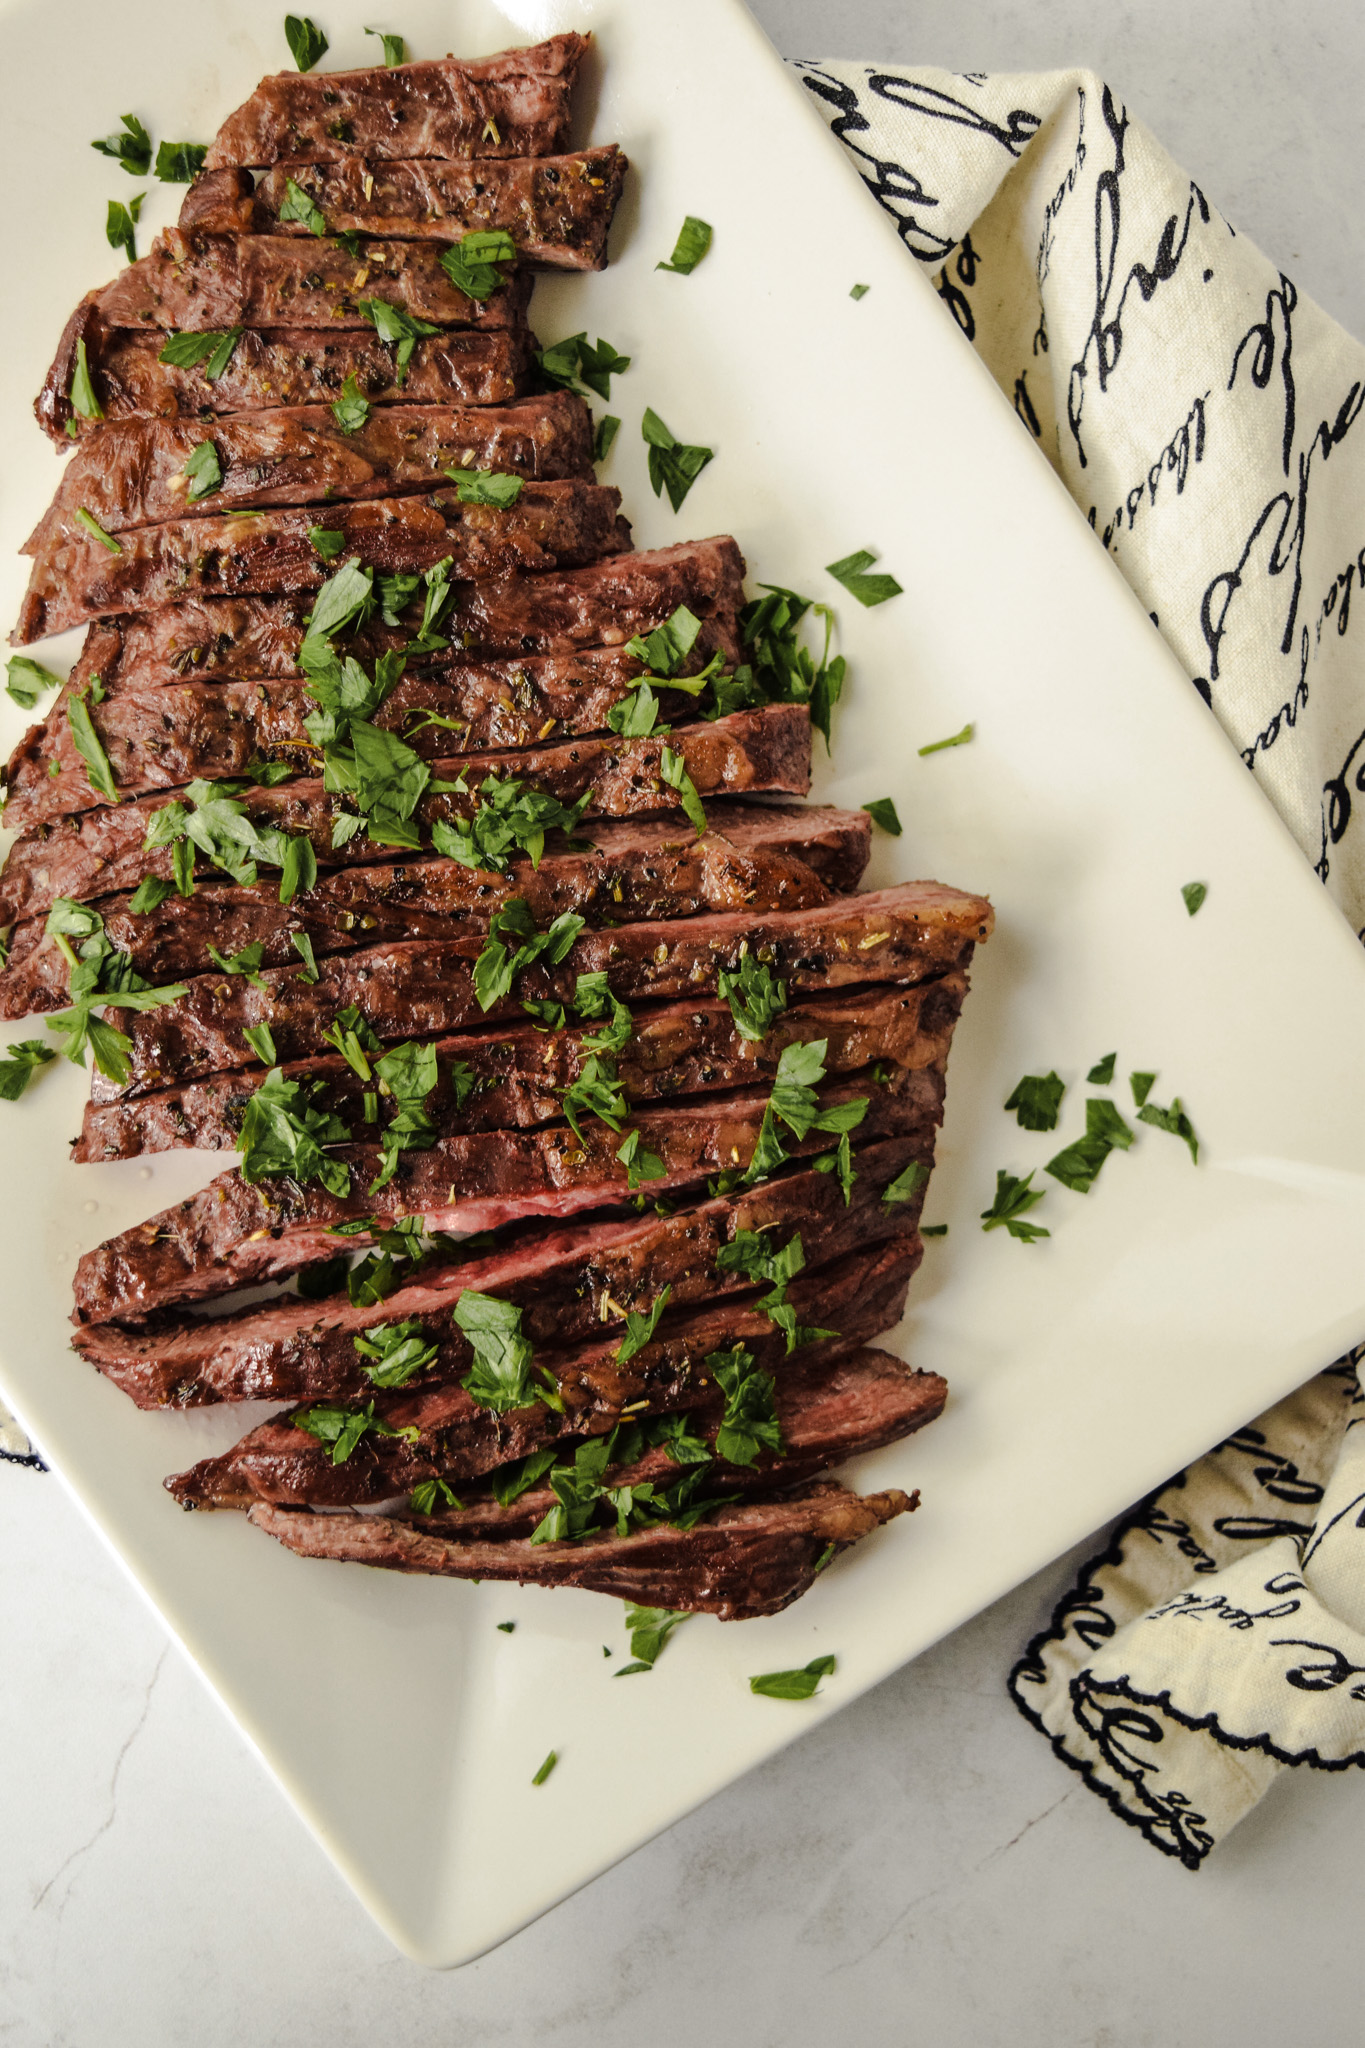 Sliced Broiled Skirt Steak with Parsley